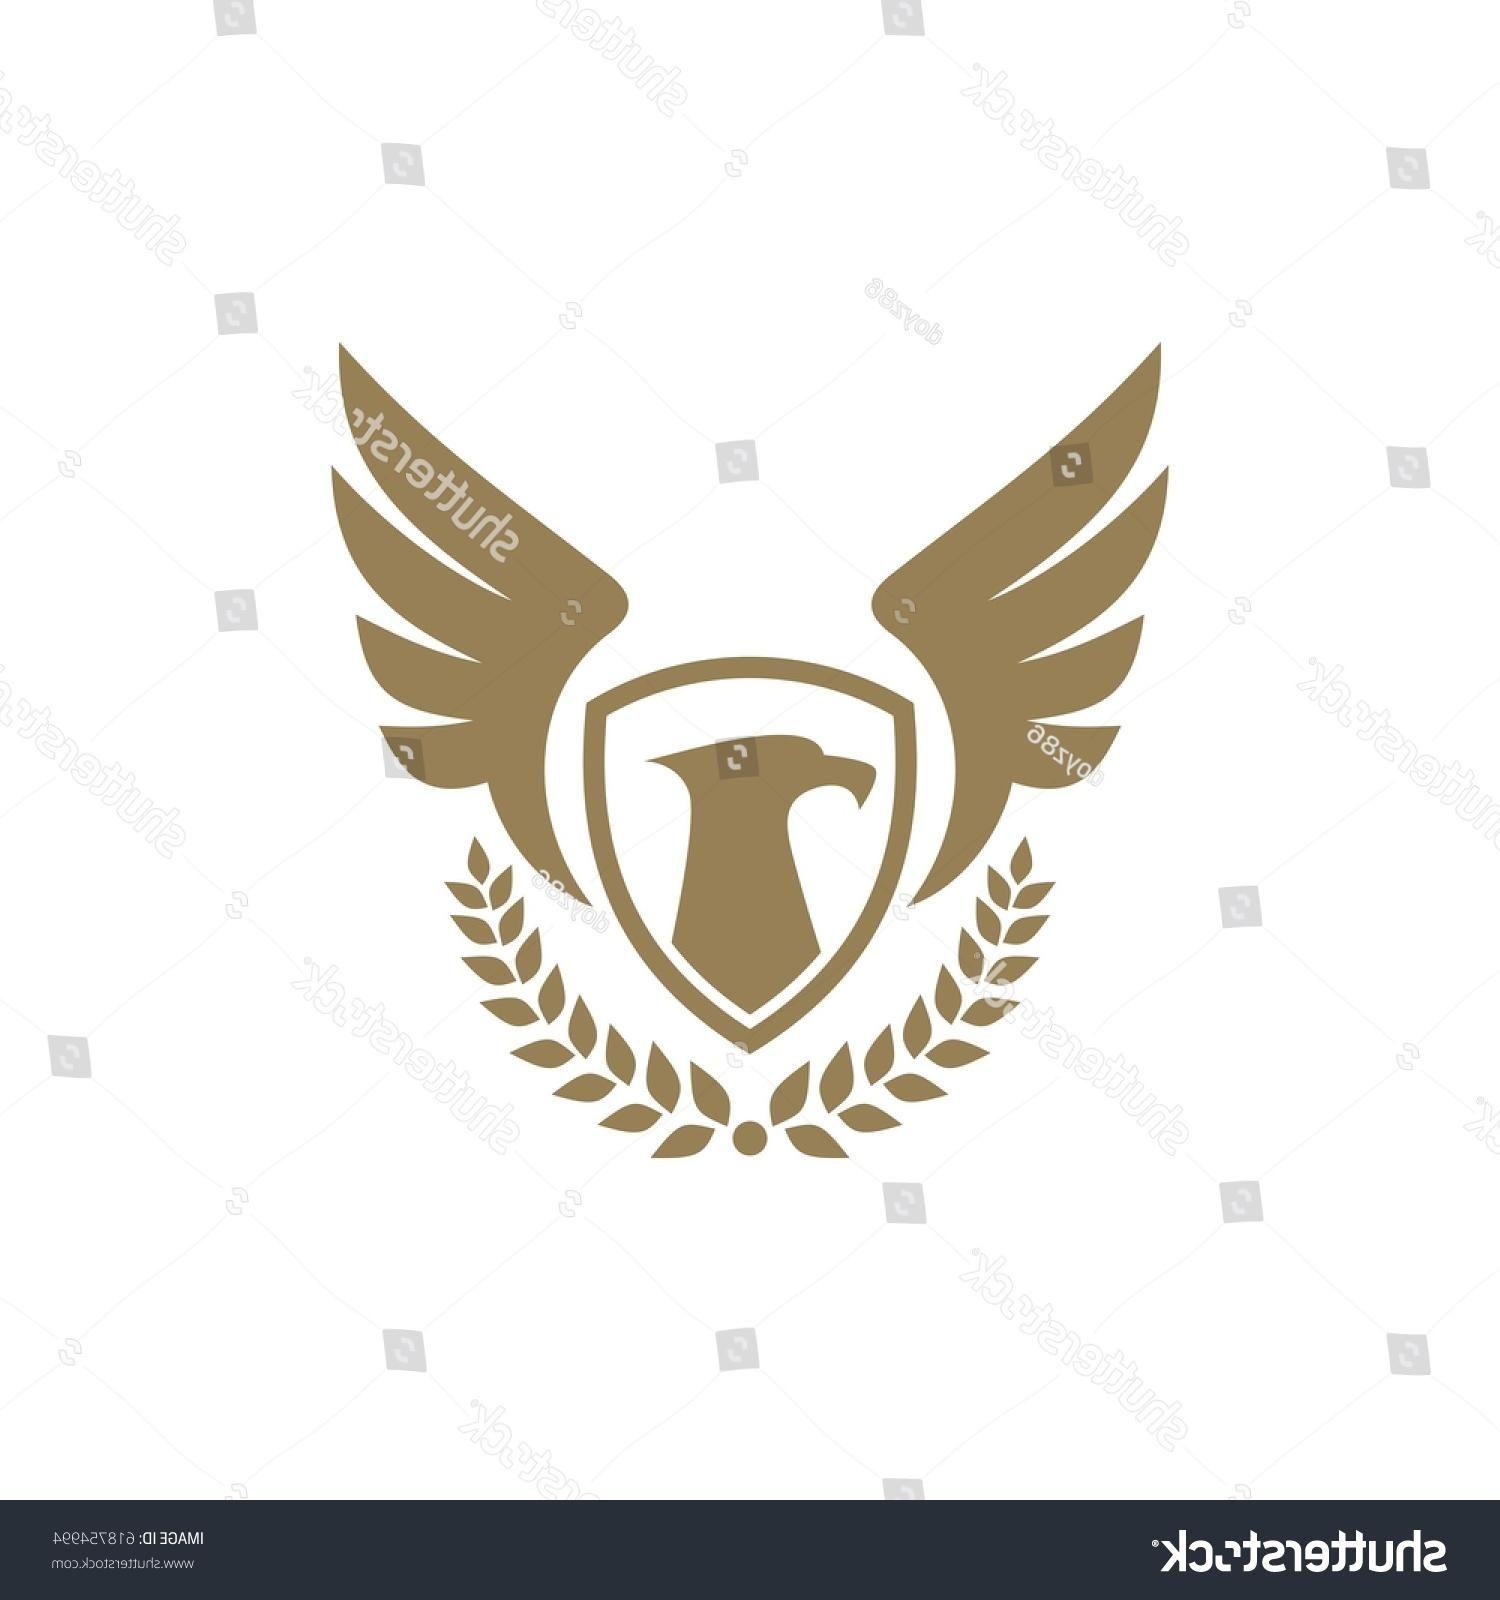 Army Bird Logo - Best 15 Stock Vector Army And Military Logo Design File Free